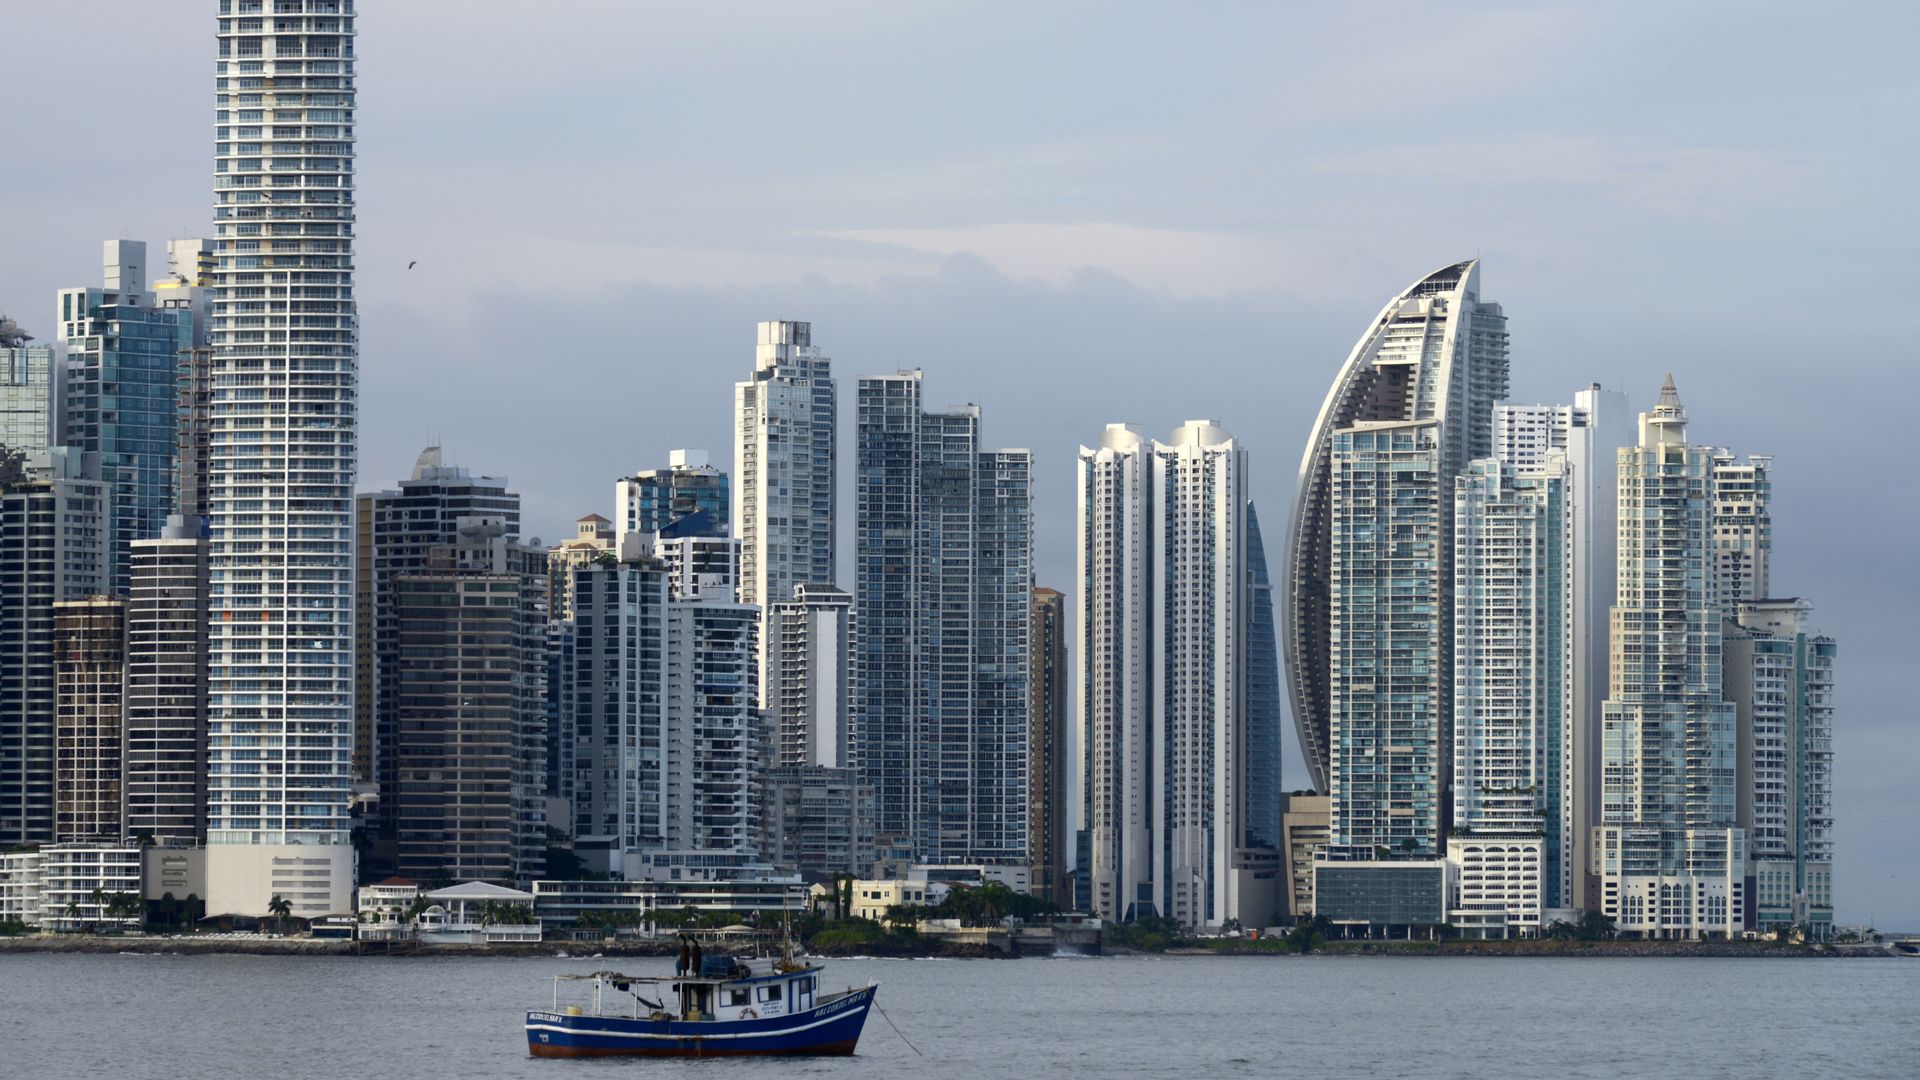 The Panama City skyline seen from the water